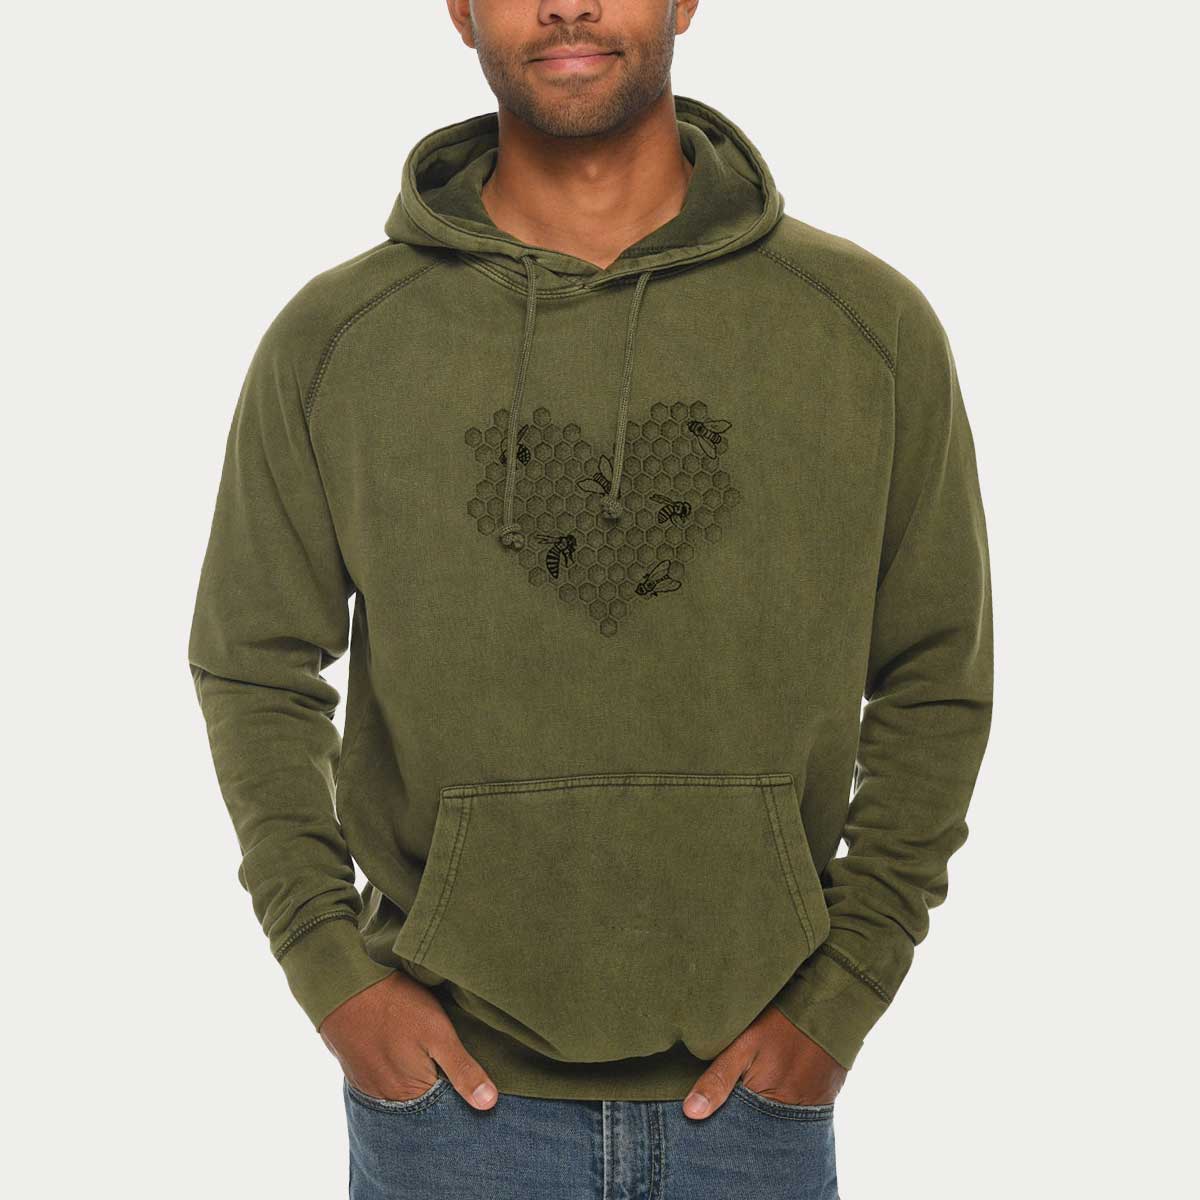 Honeycomb Heart with Bees  - Mid-Weight Unisex Vintage 100% Cotton Hoodie